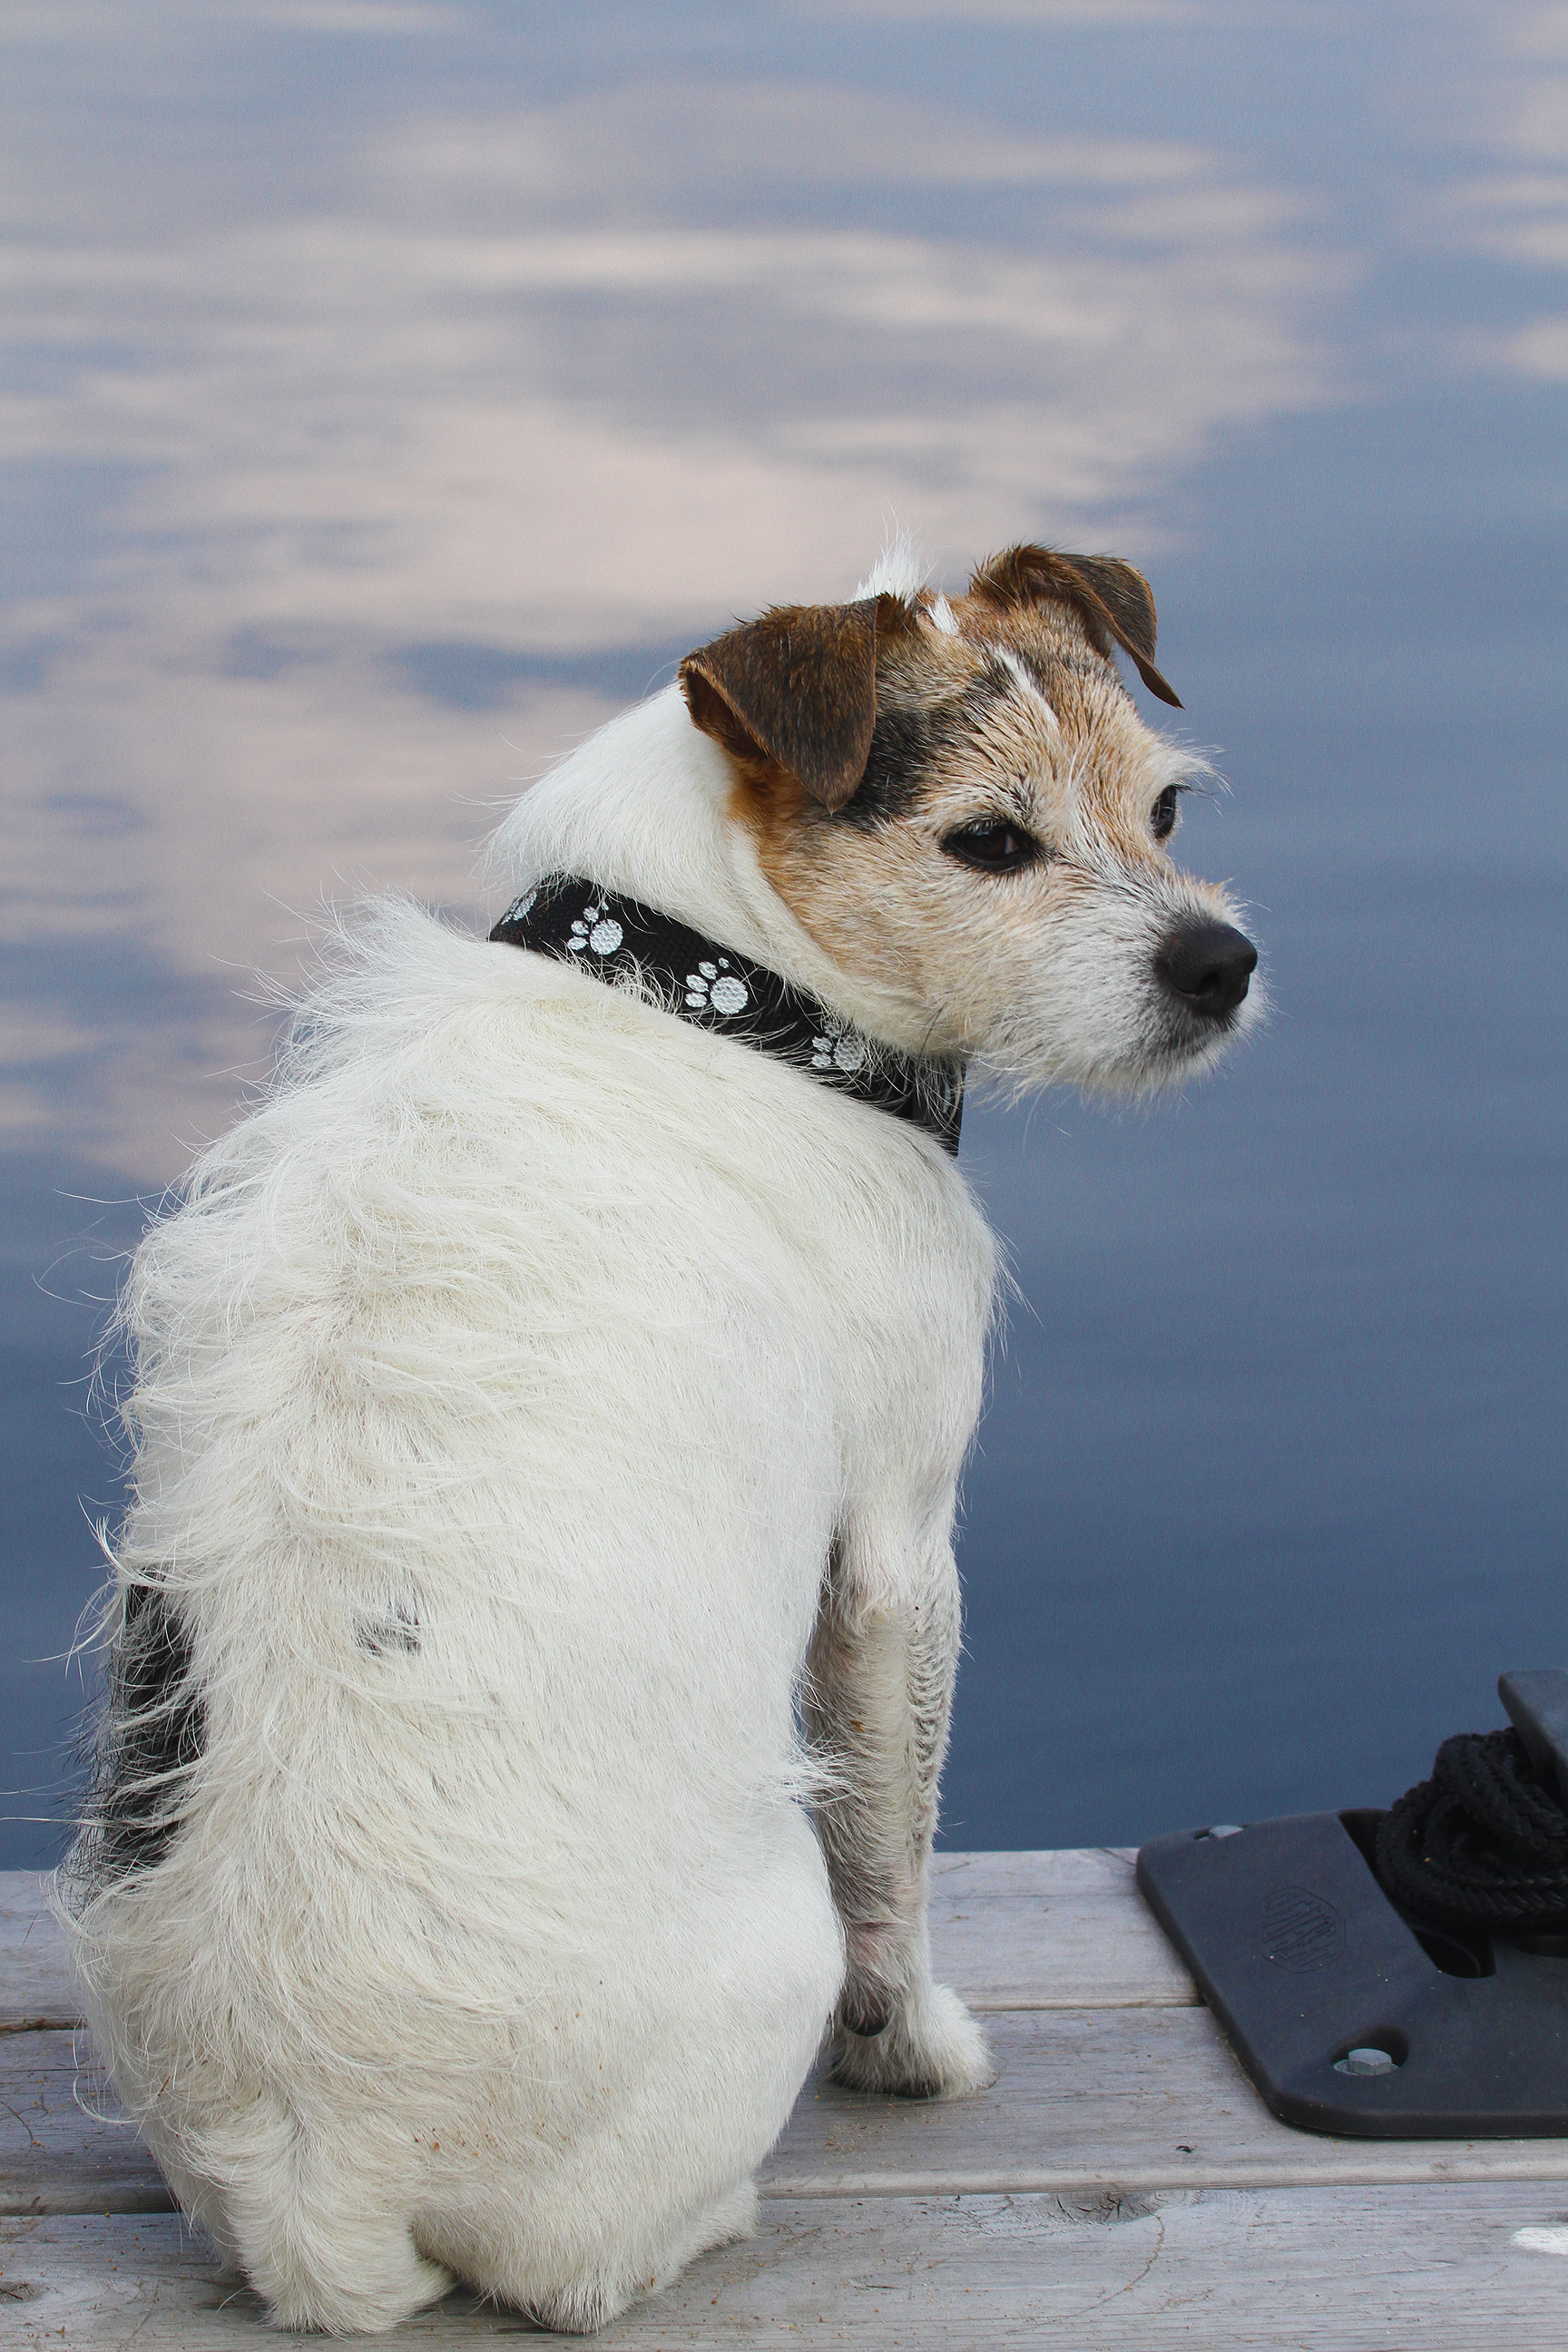 Benny on the dock